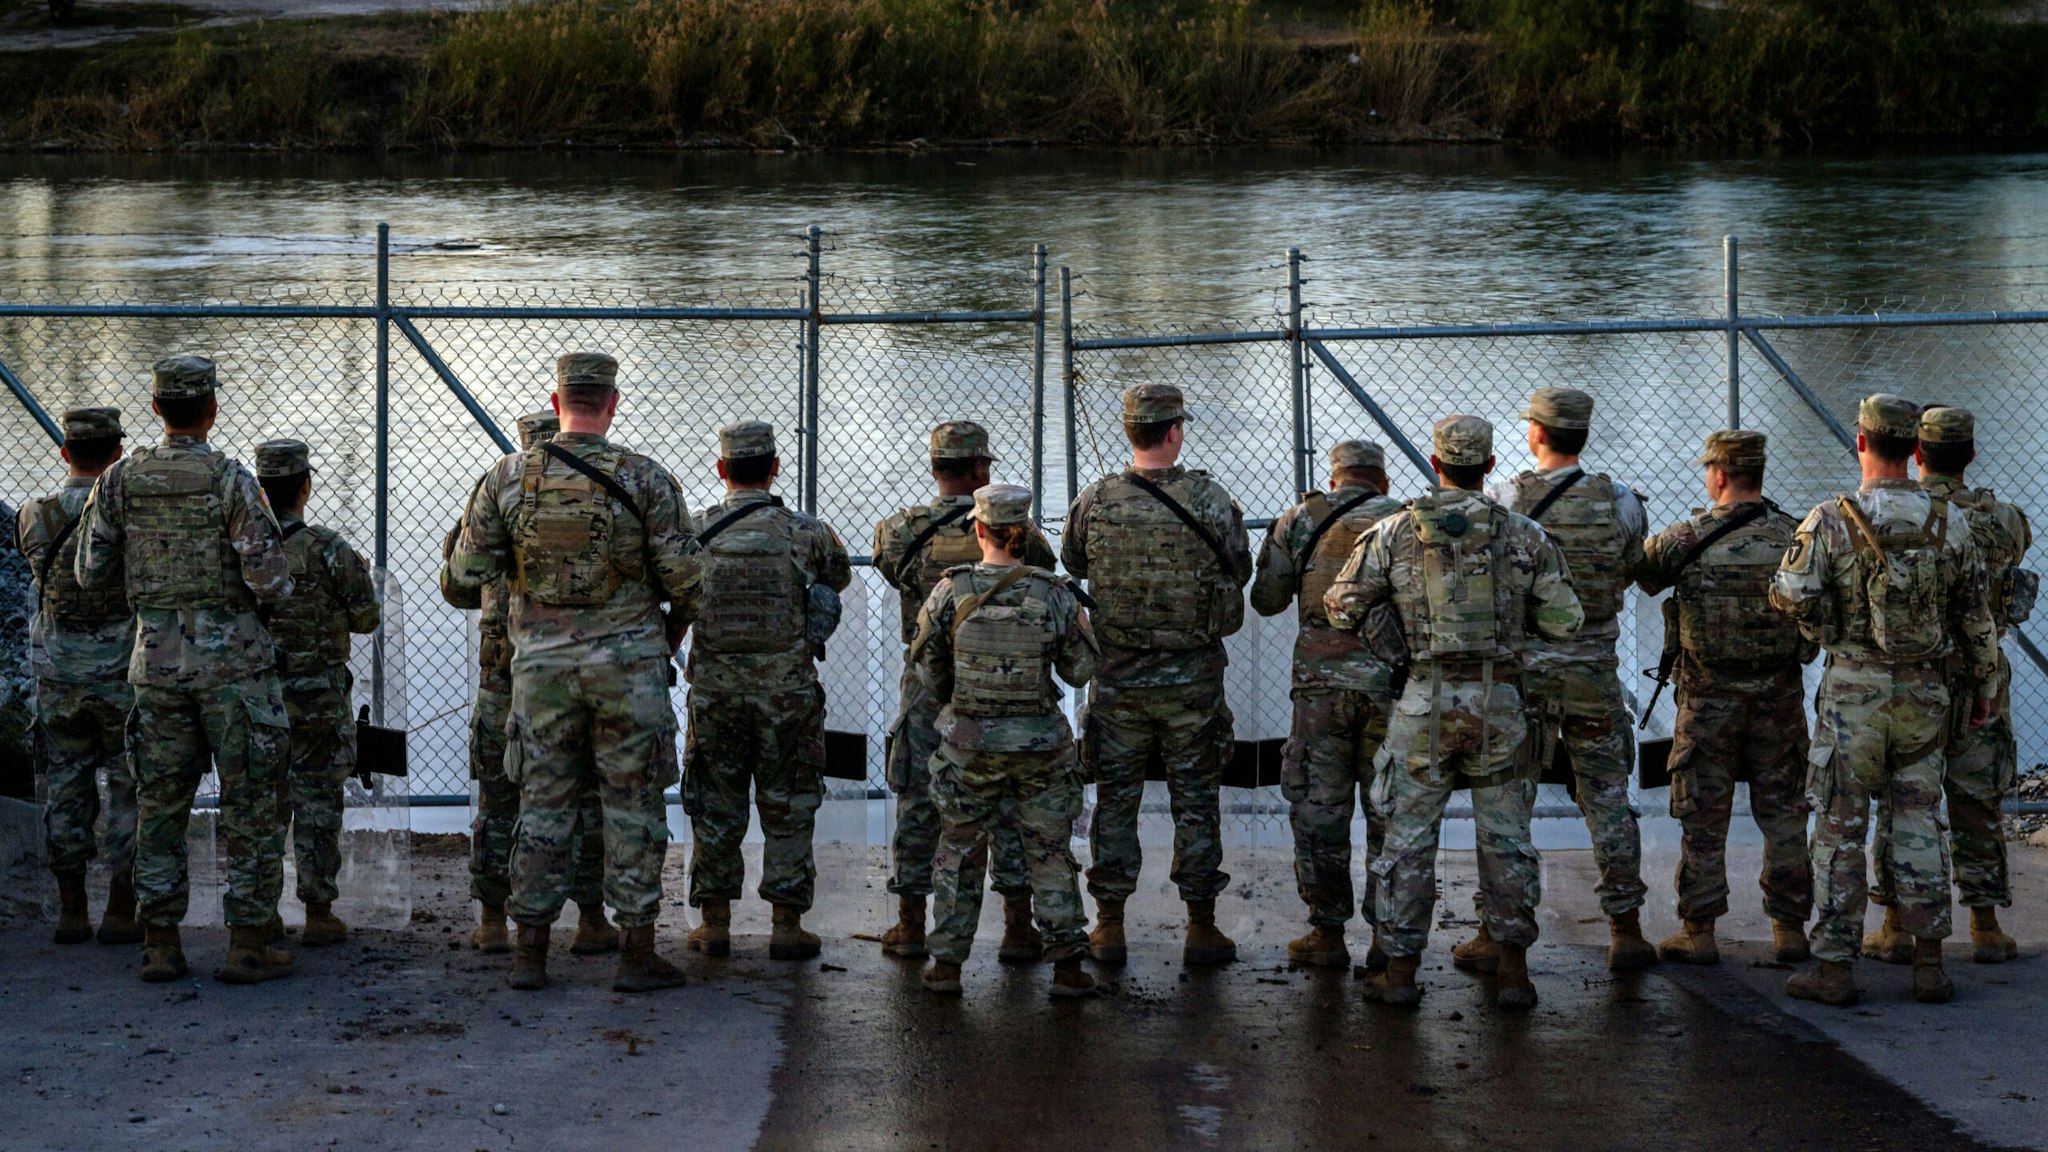 EAGLE PASS, TEXAS - JANUARY 12: National Guard soldiers stand guard on the banks of the Rio Grande river at Shelby Park on January 12, 2024 in Eagle Pass, Texas. The Texas National Guard continues its blockade and surveillance of Shelby Park in an effort to deter illegal immigration. The Department of Justice has accused the Texas National Guard of blocking Border Patrol agents from carrying out their duties along the river.